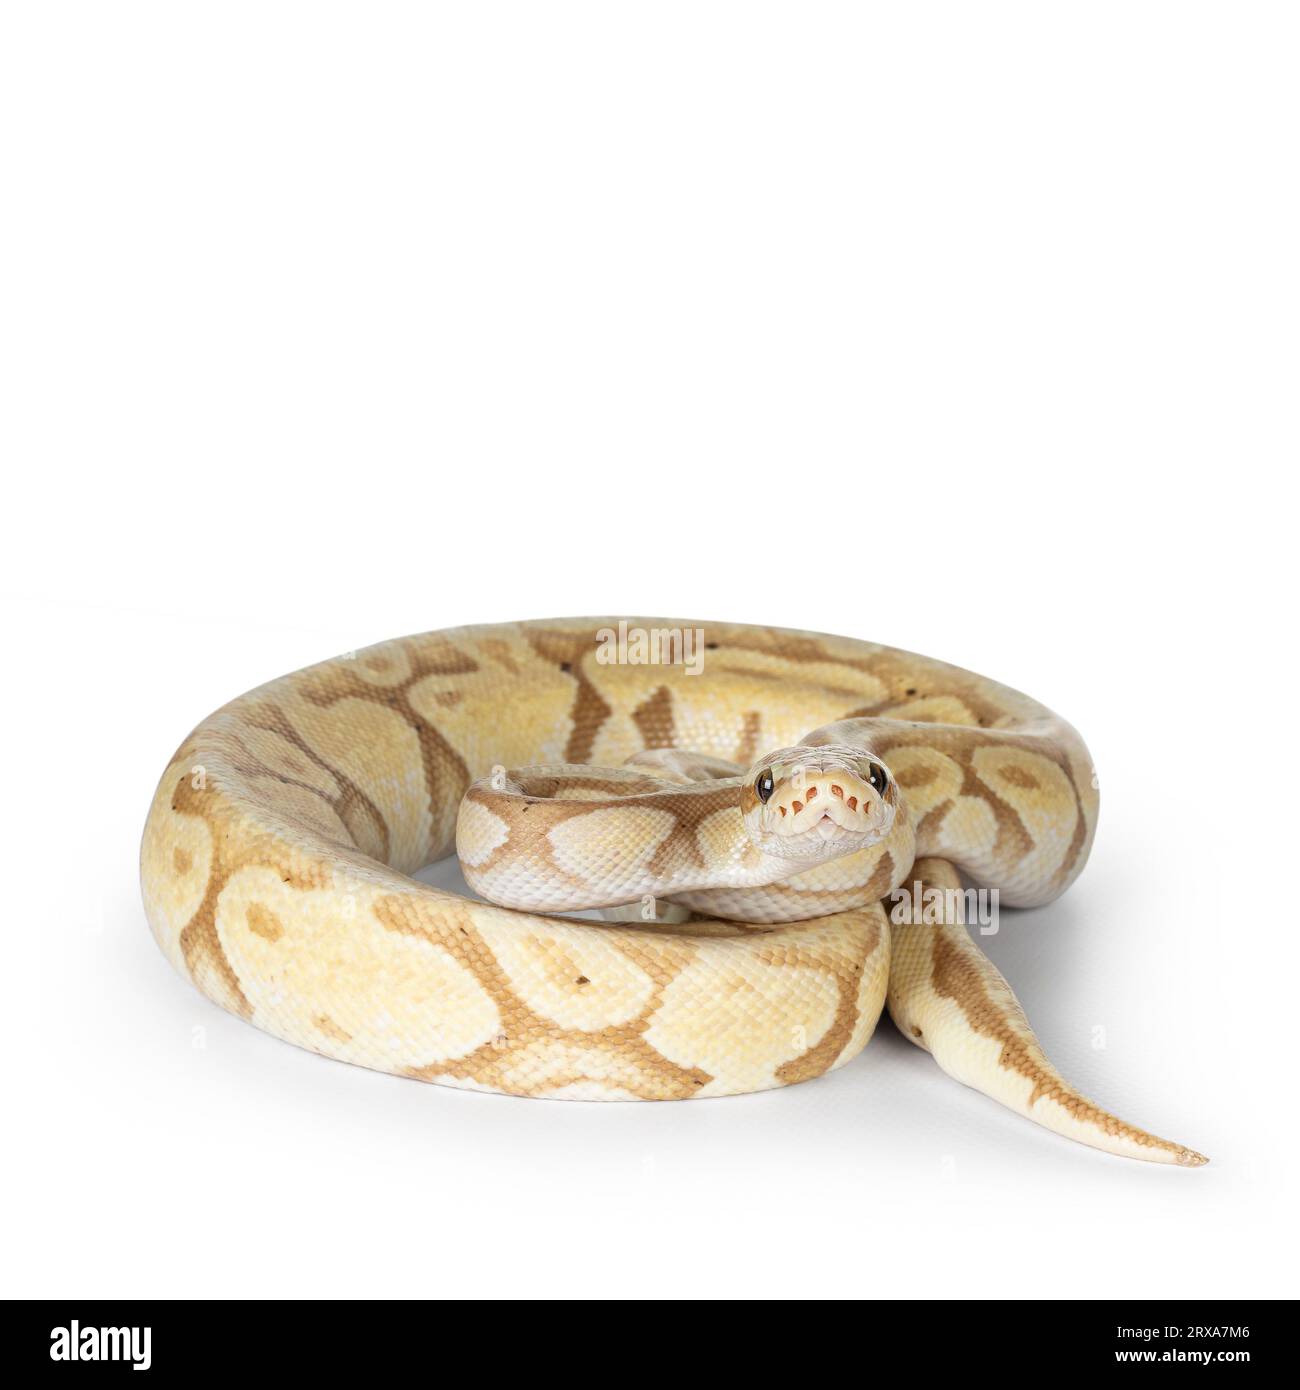 Cute yellowish ball python, curled up. Face up towards camera, looking with a smiley face to lens. Isolated on a white background. Stock Photo